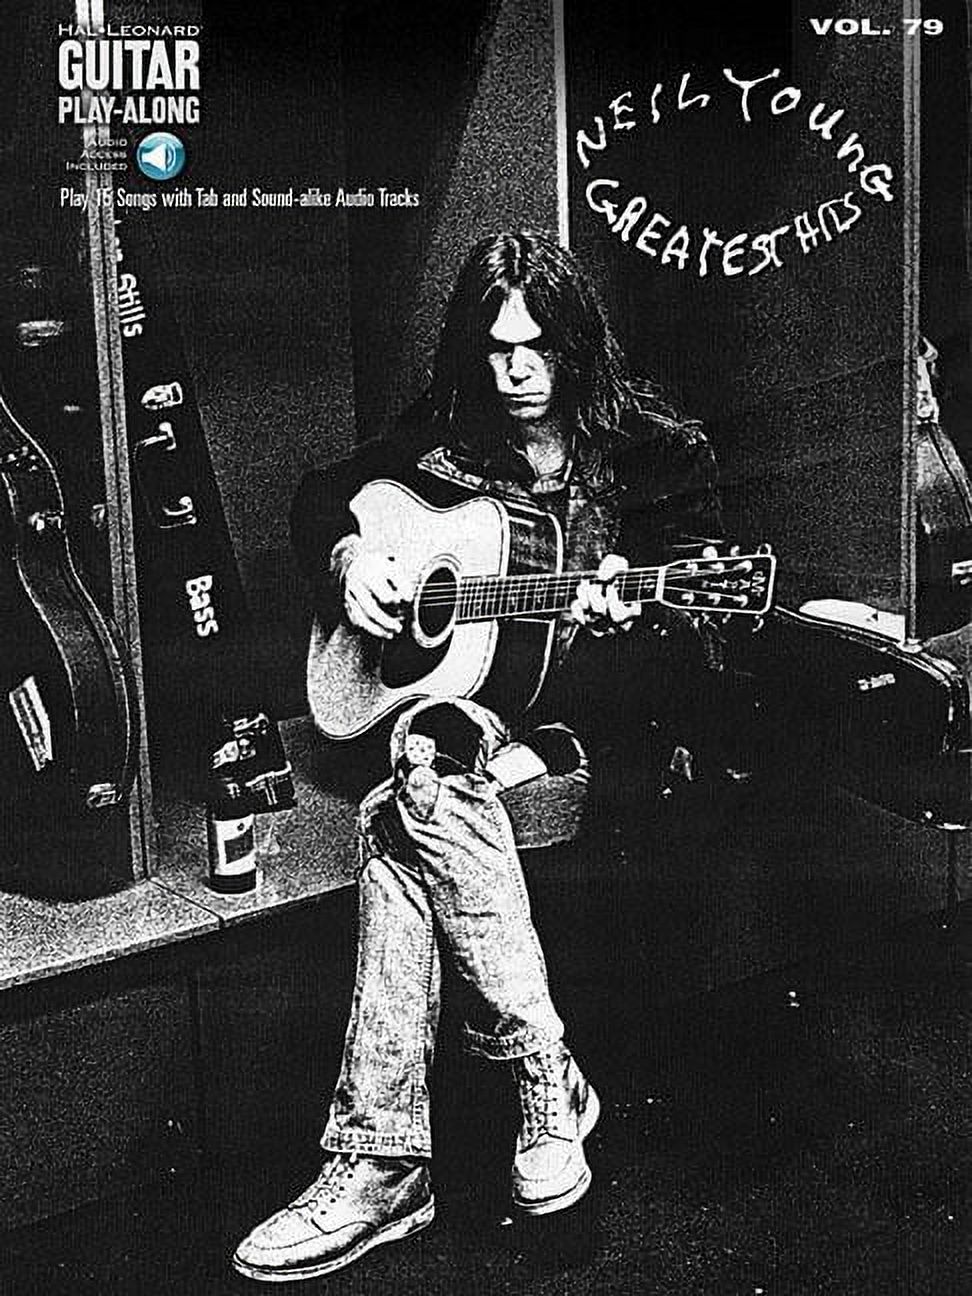 Neil Young: Guitar Play-Along Volume 79 (Book/Online Audio) - image 1 of 1